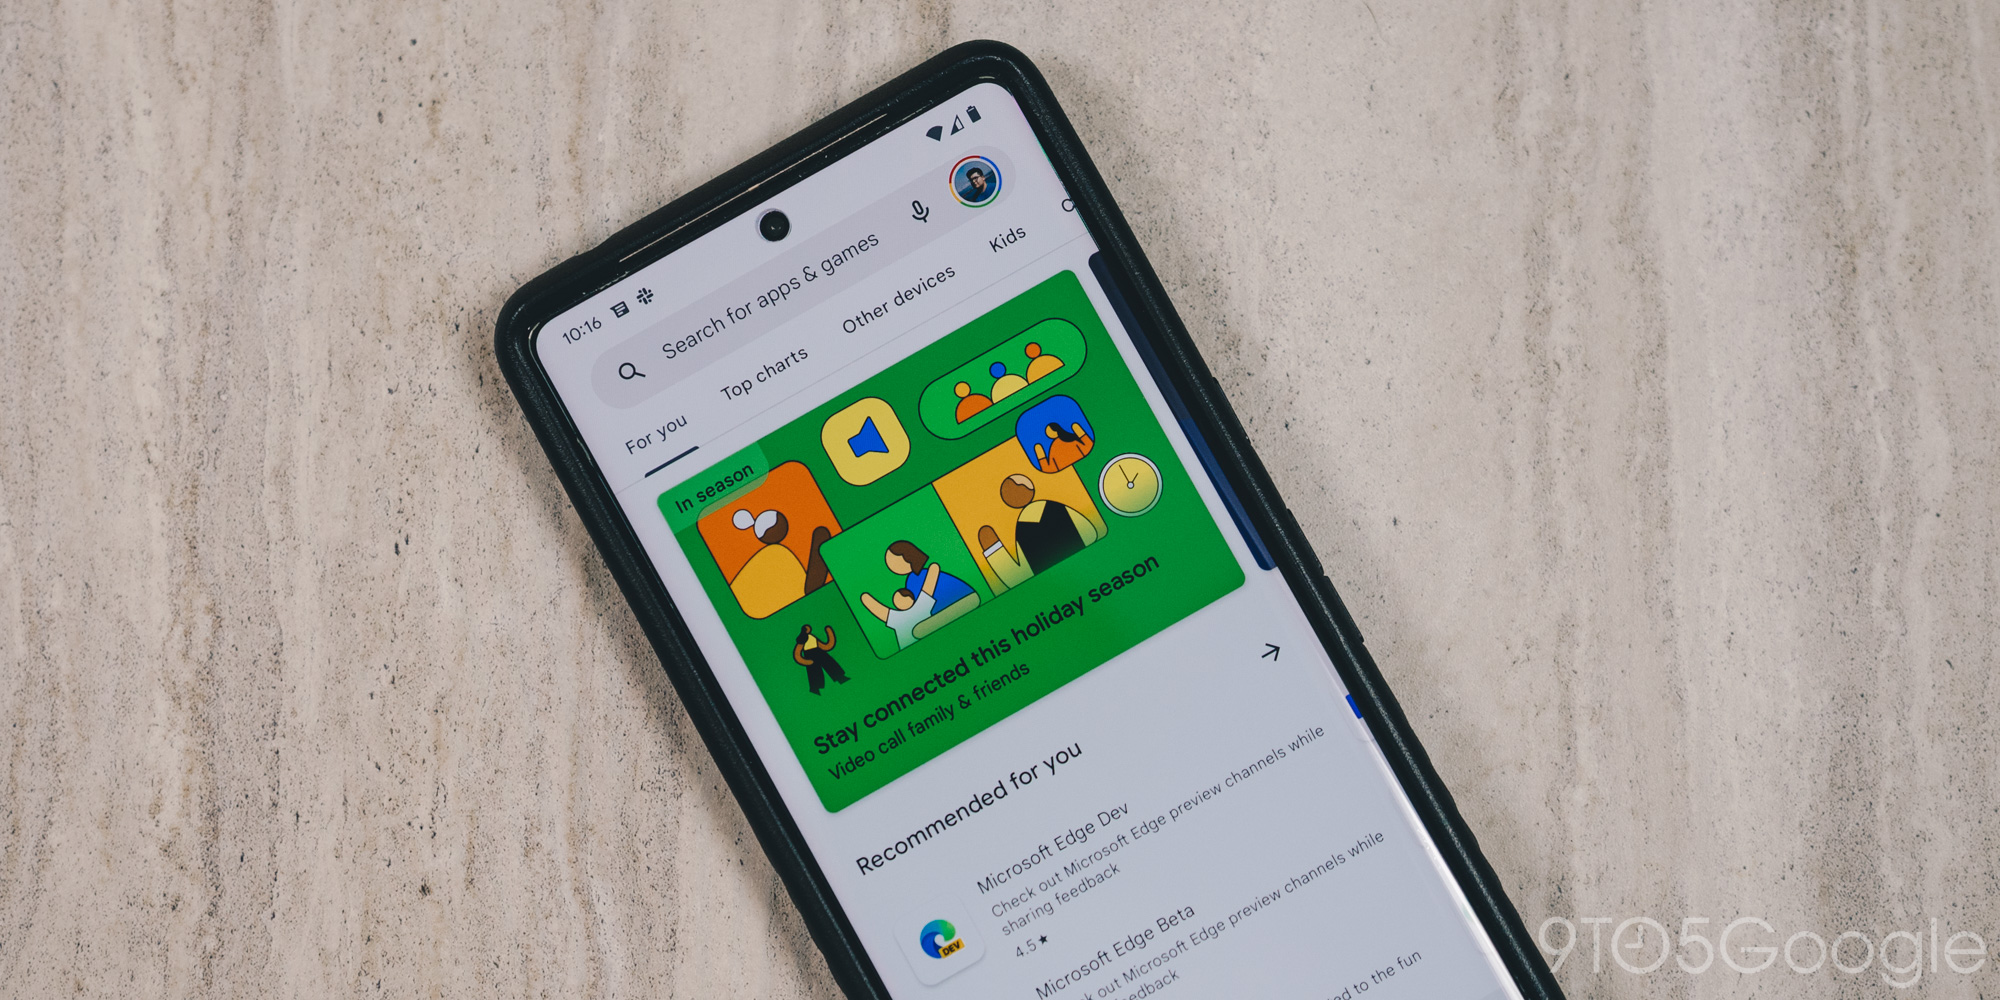 Don't forget to claim your Google Play gift card before the promotion ends  in a few days! (Should appear in the GoogleFi app) : r/GoogleFi